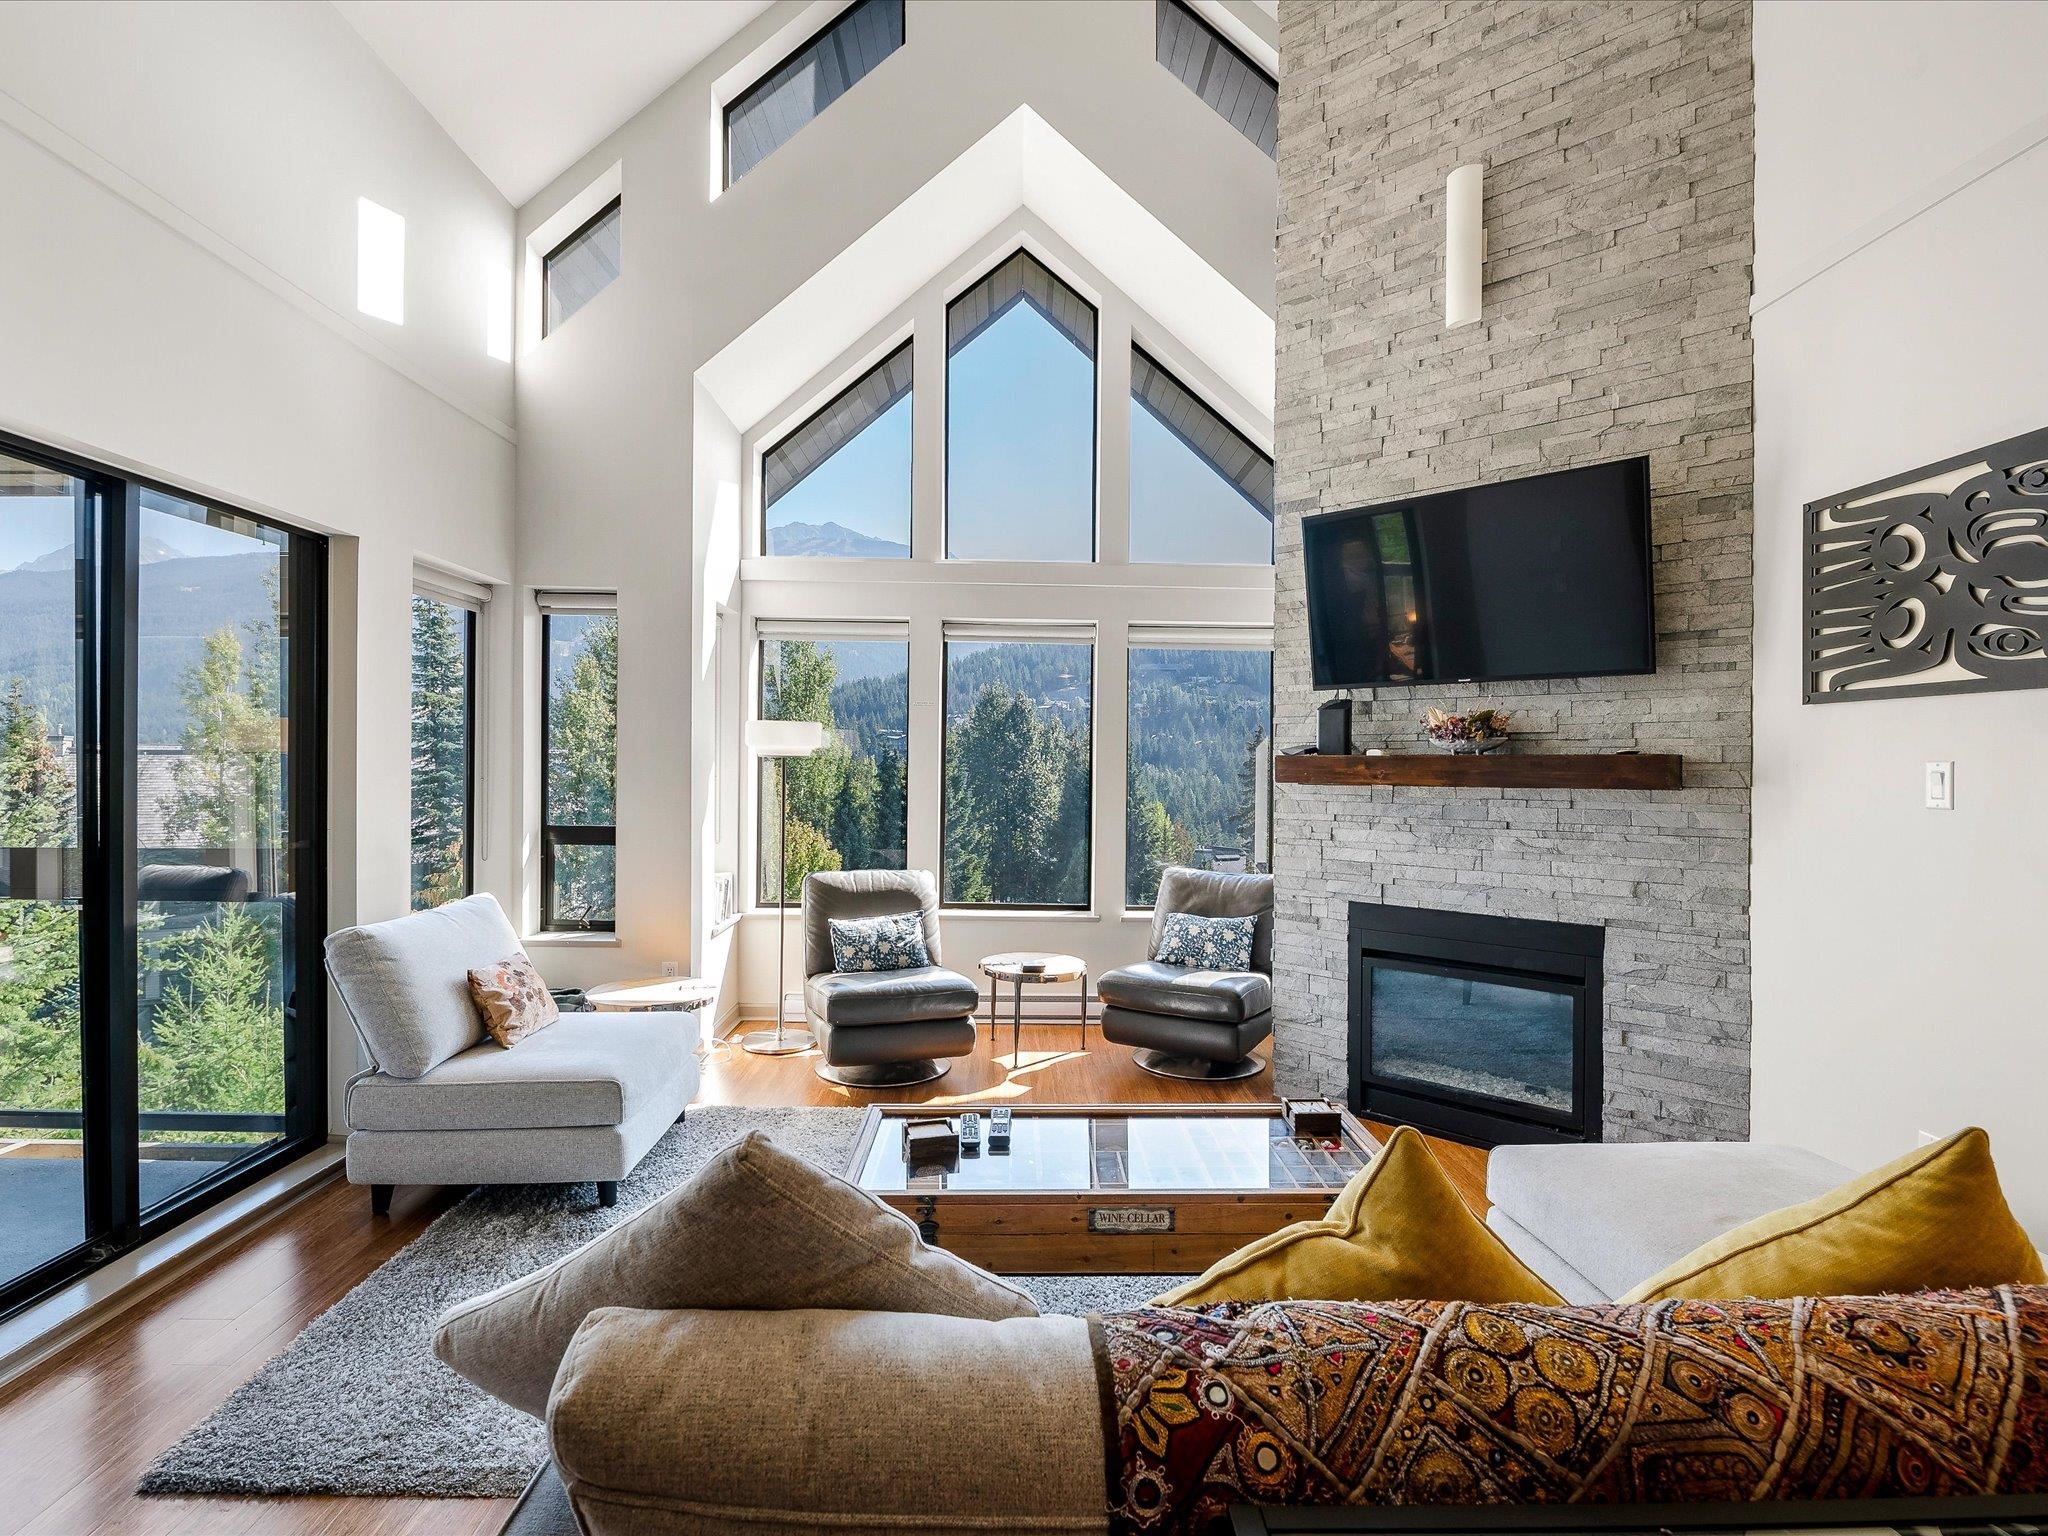 Vaulted ceilings and incredible views! Gas fireplace and new hearth.